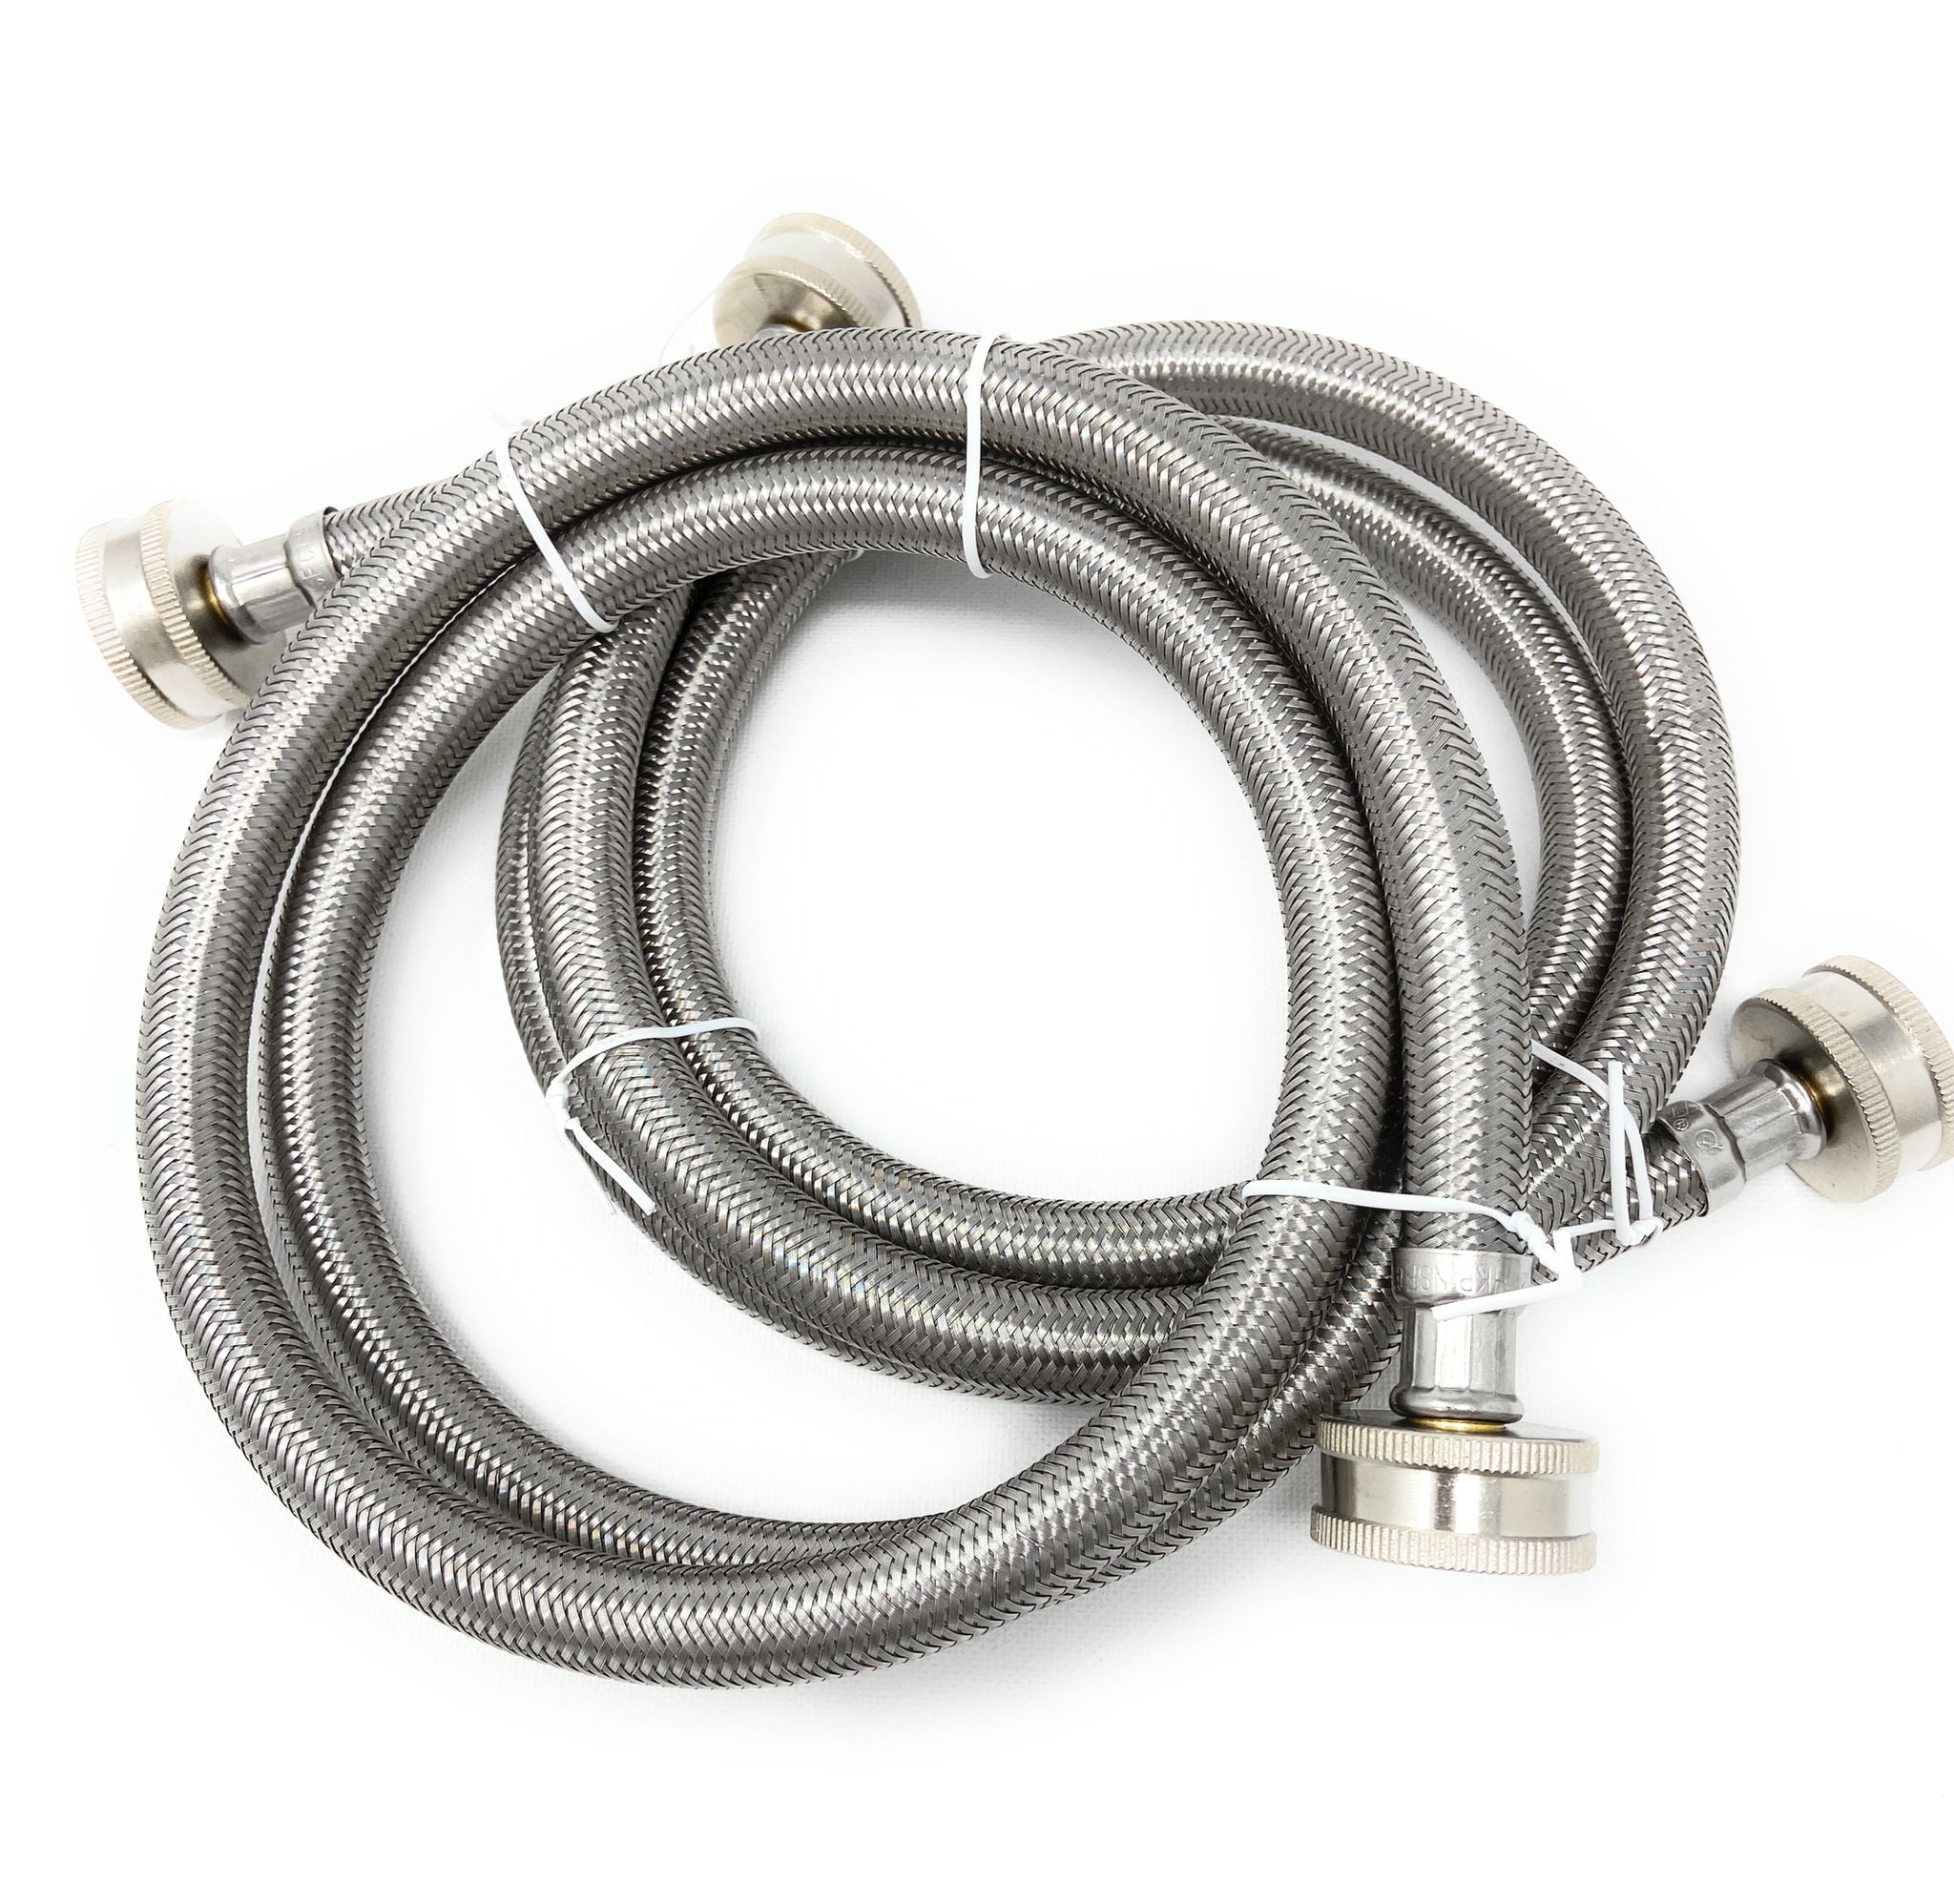 Stainless Steel Washing Machine 90 Degree 5' Set Inlet Fill Hoses with Washers 